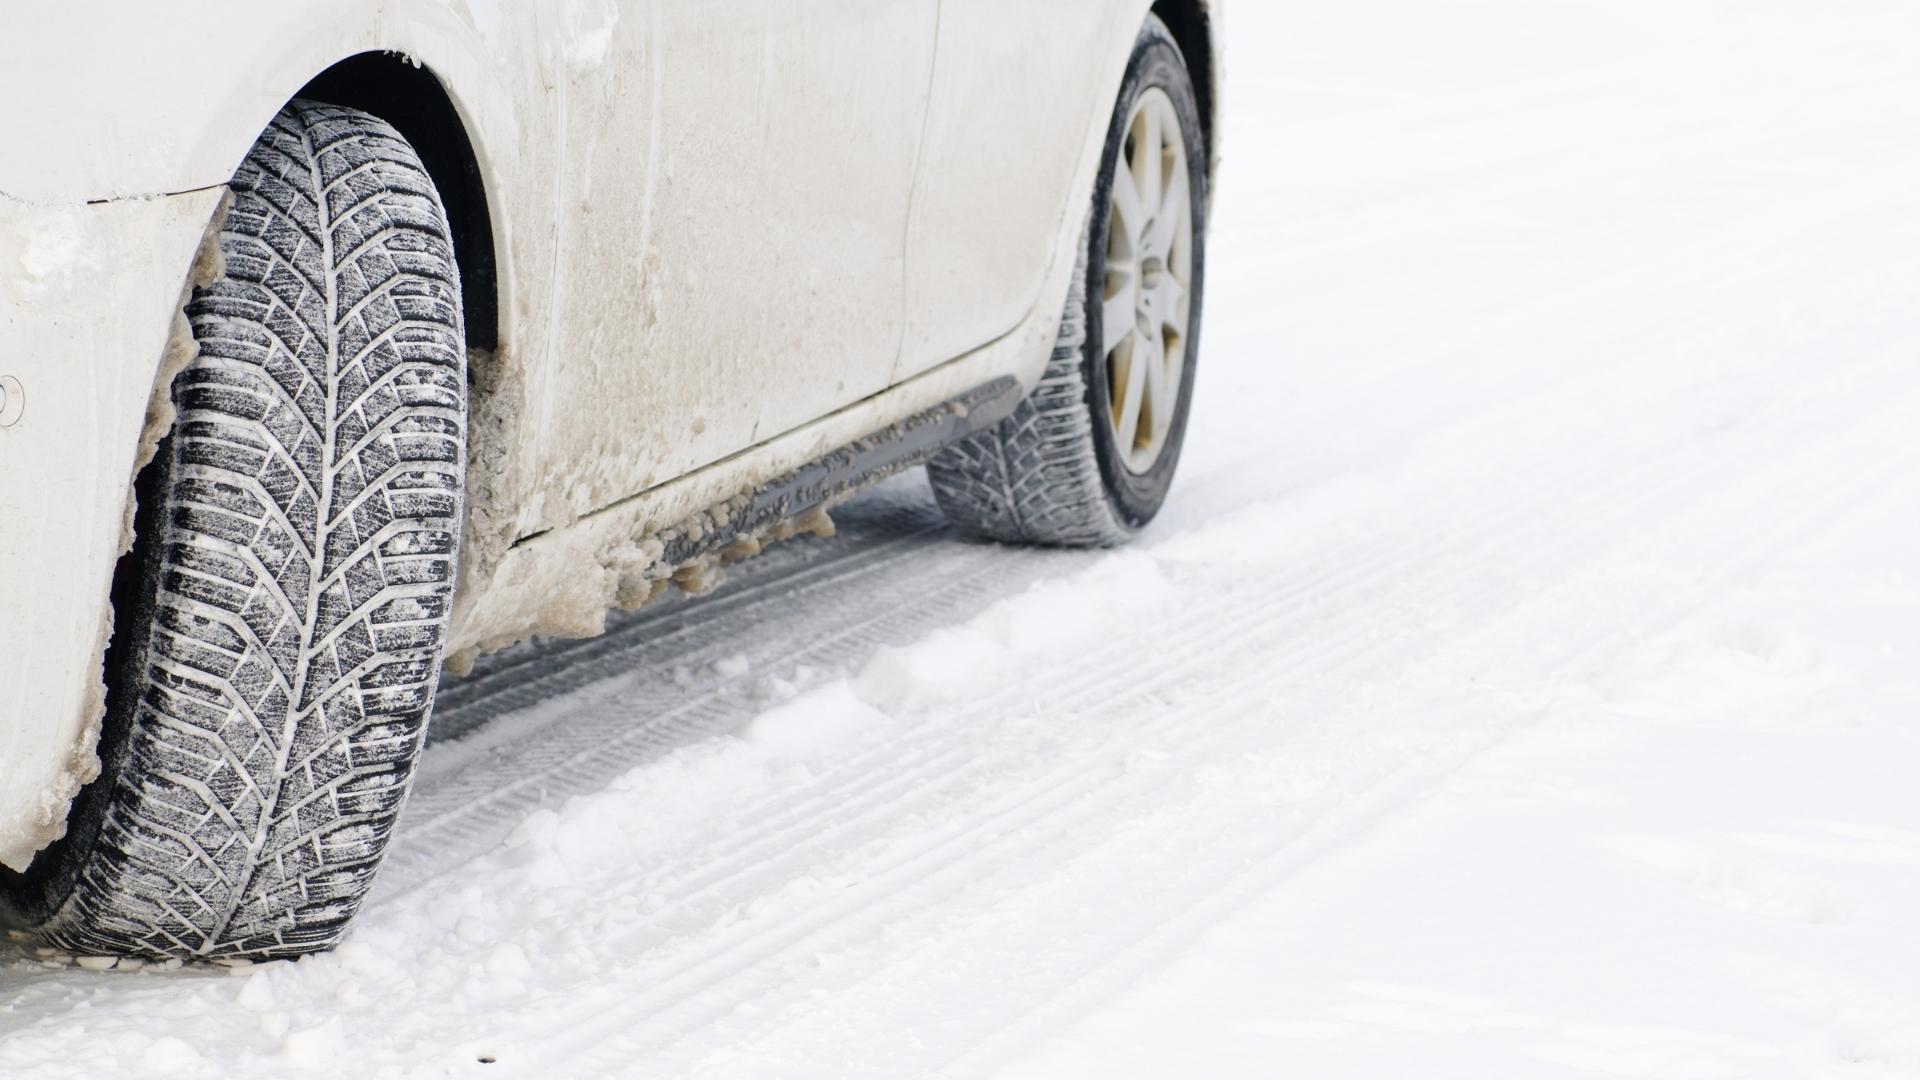 Car in the winter road is covered with road salt and dirt.